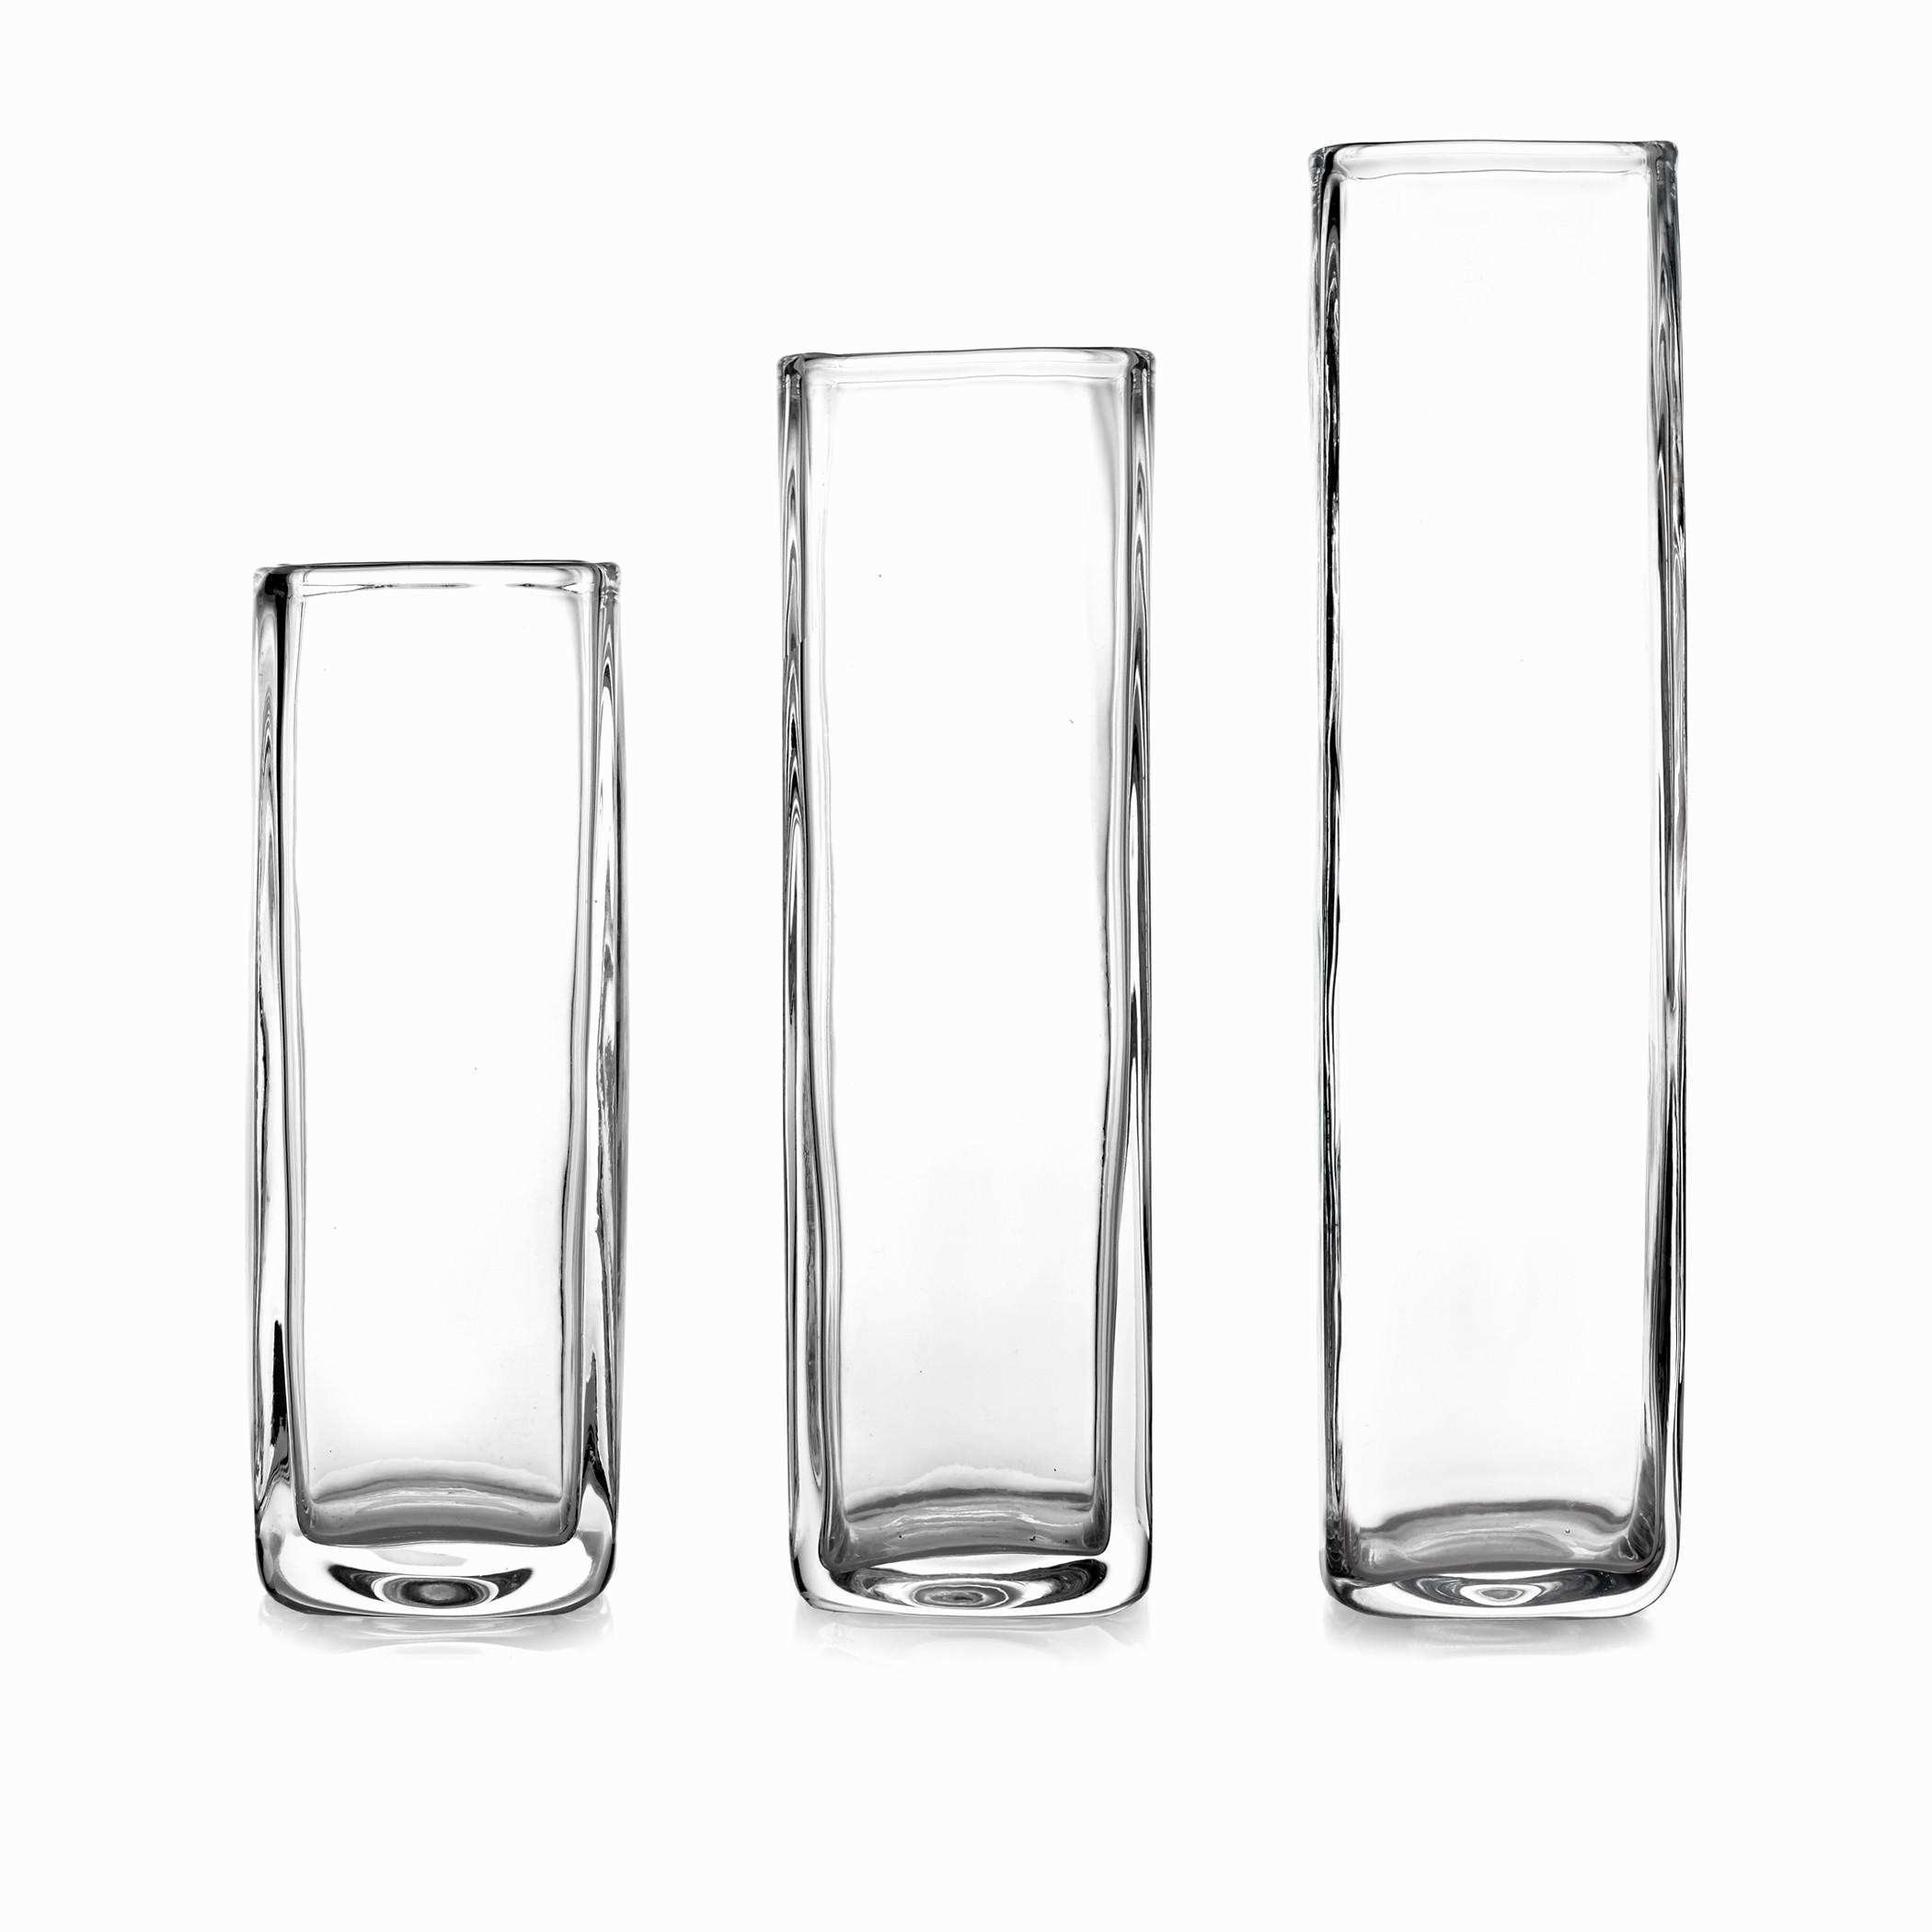 kate spade crystal vase of tall black vases pics cityscape 4 x 39 5 footed clear glass cylinder with tall black vases gallery glass wedding centerpieces inspirational living room tall glass of tall black vases